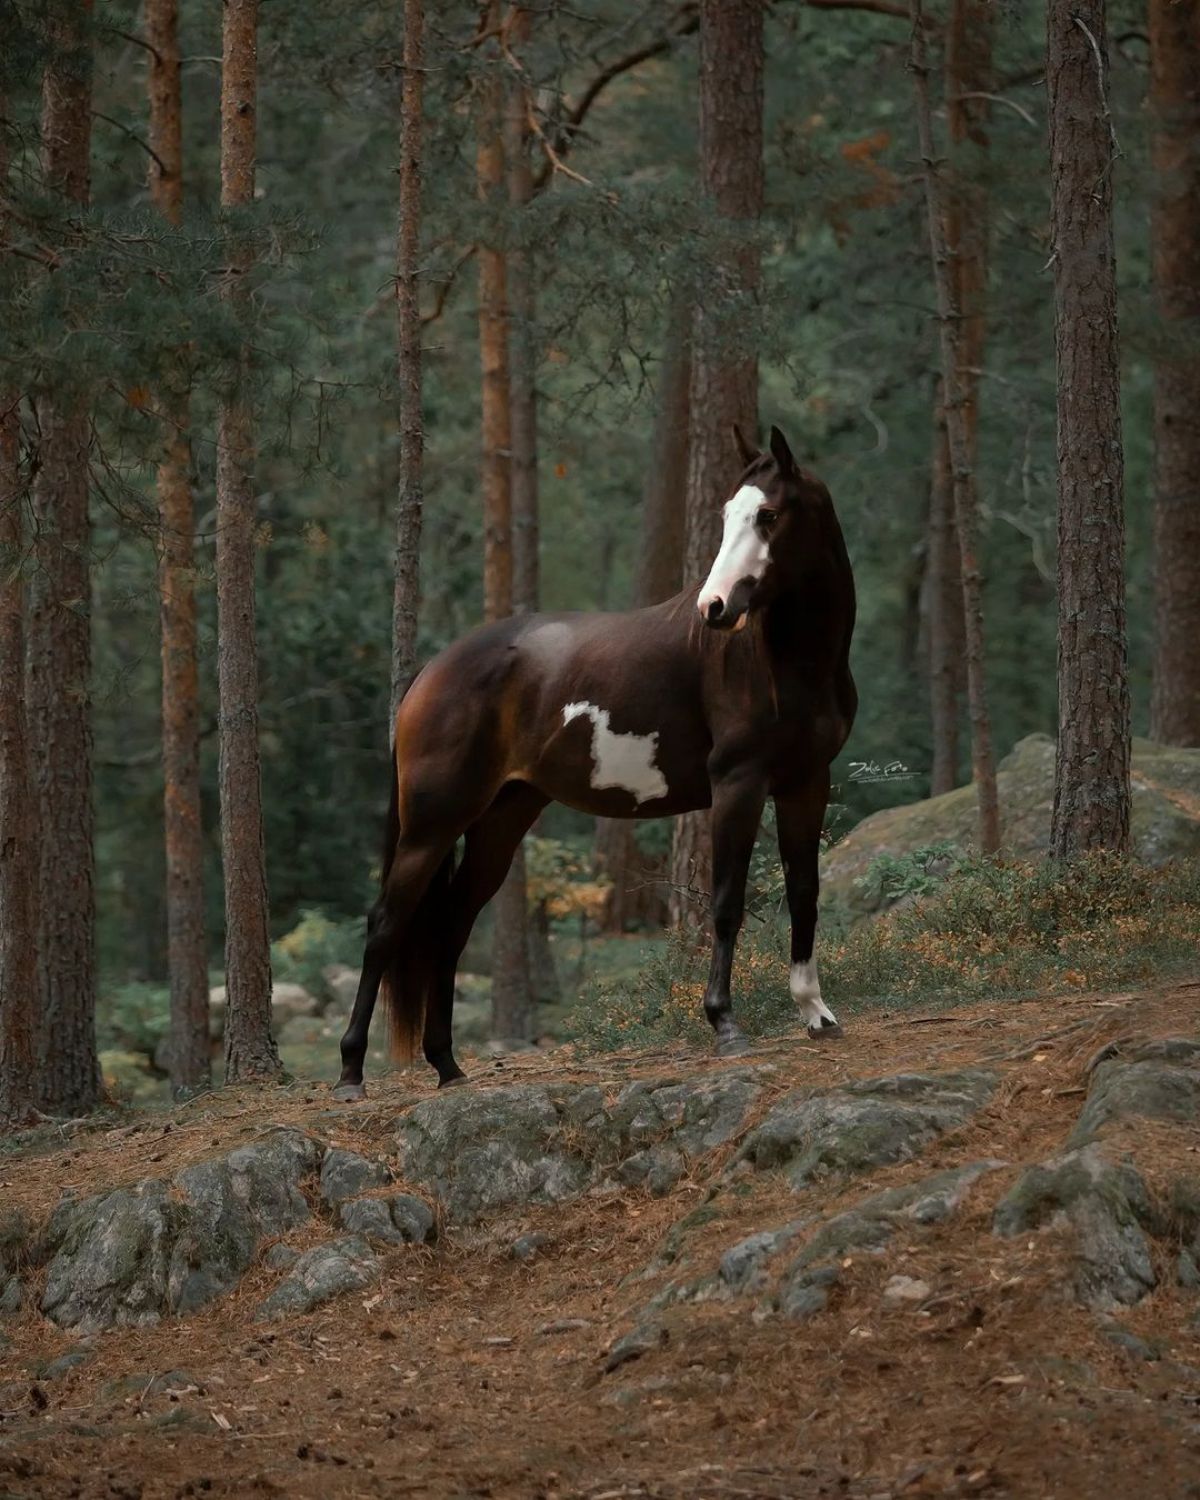 A brown white-spotted American Paint Horse in a forest.